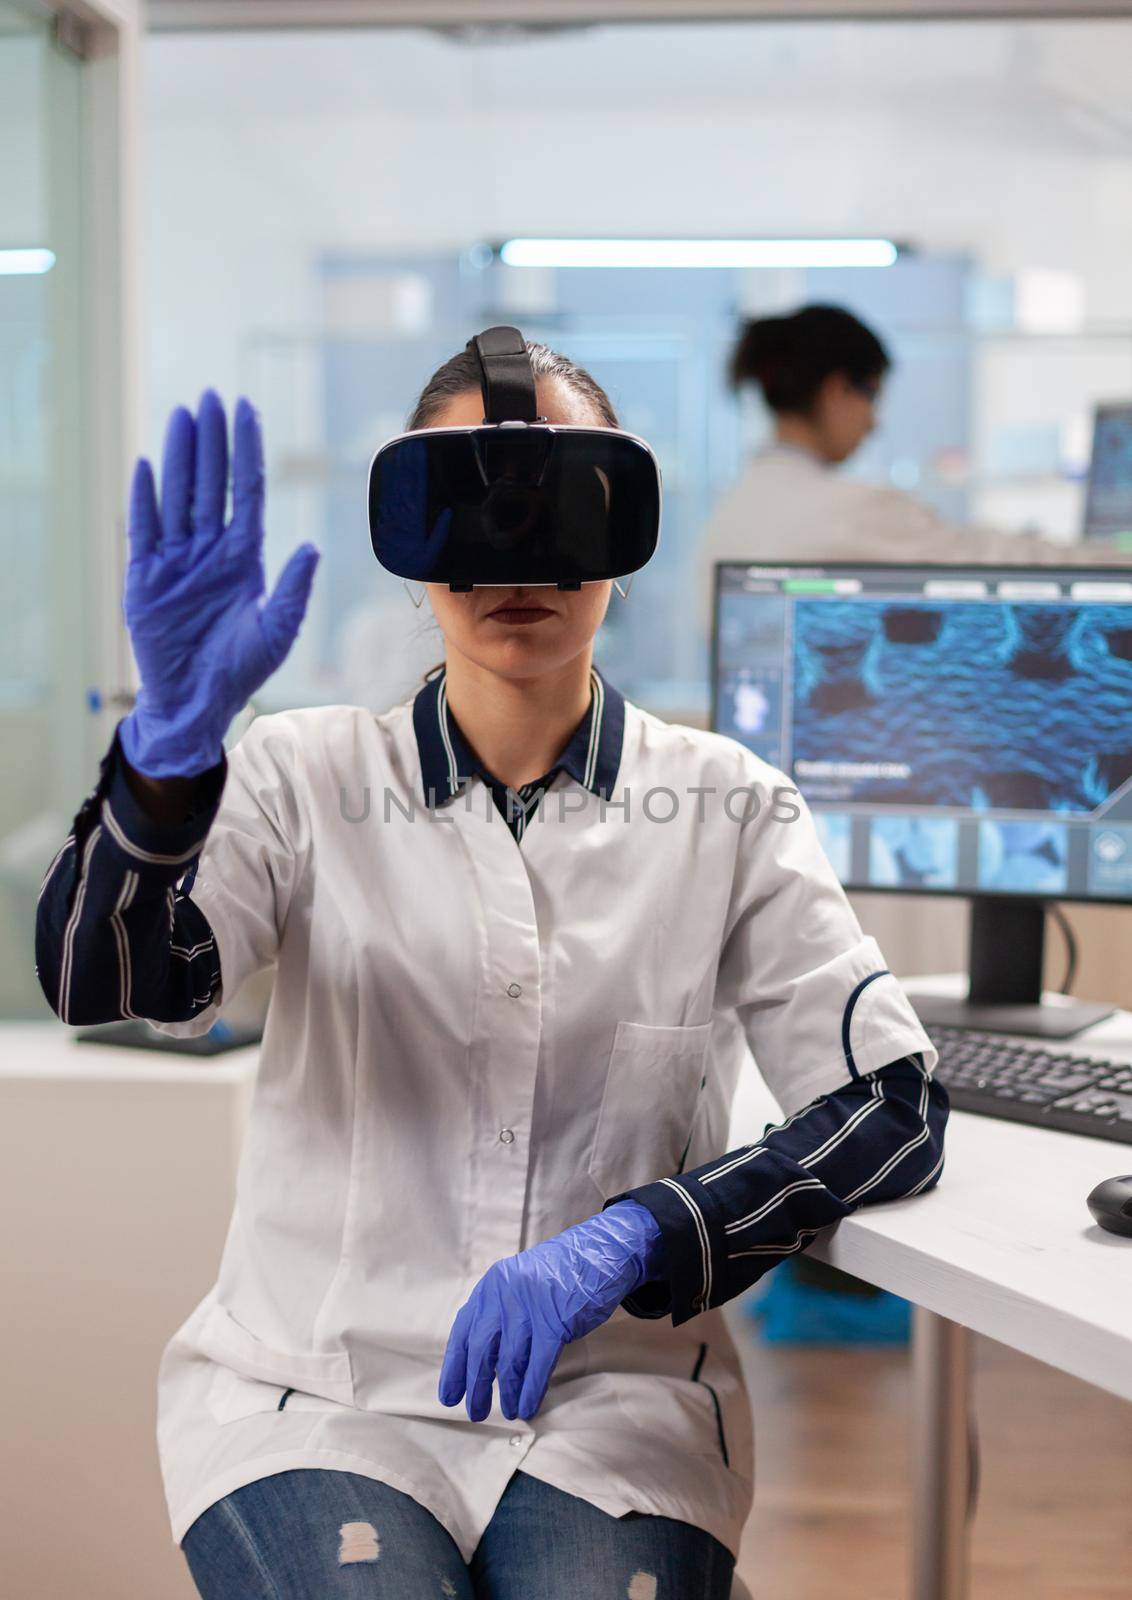 Laboratory doctor experiencing virtual reality using vr goggles in medical research lab. Team of researchers working with equipment device, future, medicine, healthcare, professional, vision, simulator.